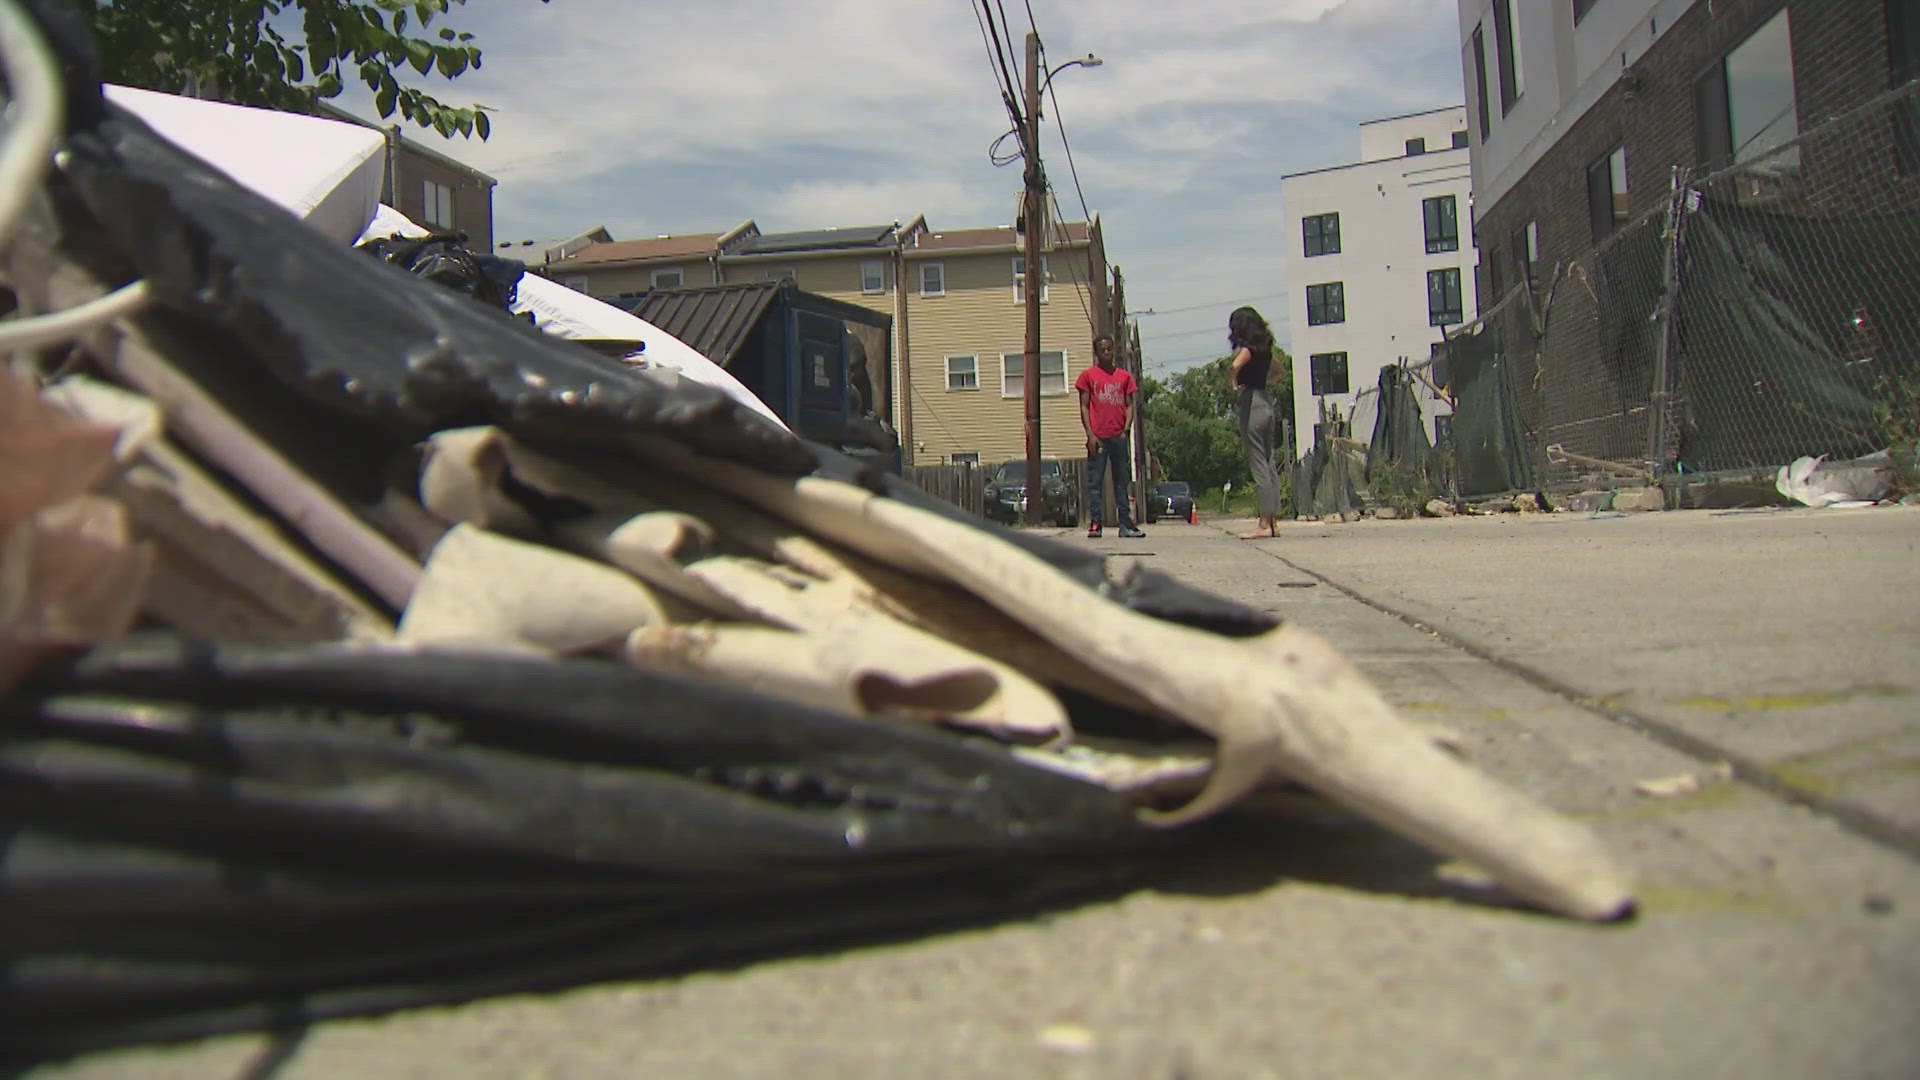 Residents from the 1900 block of Curtis Court told WUSA9 the illegal dumping is leading to rats, racoons and unwanted smells.